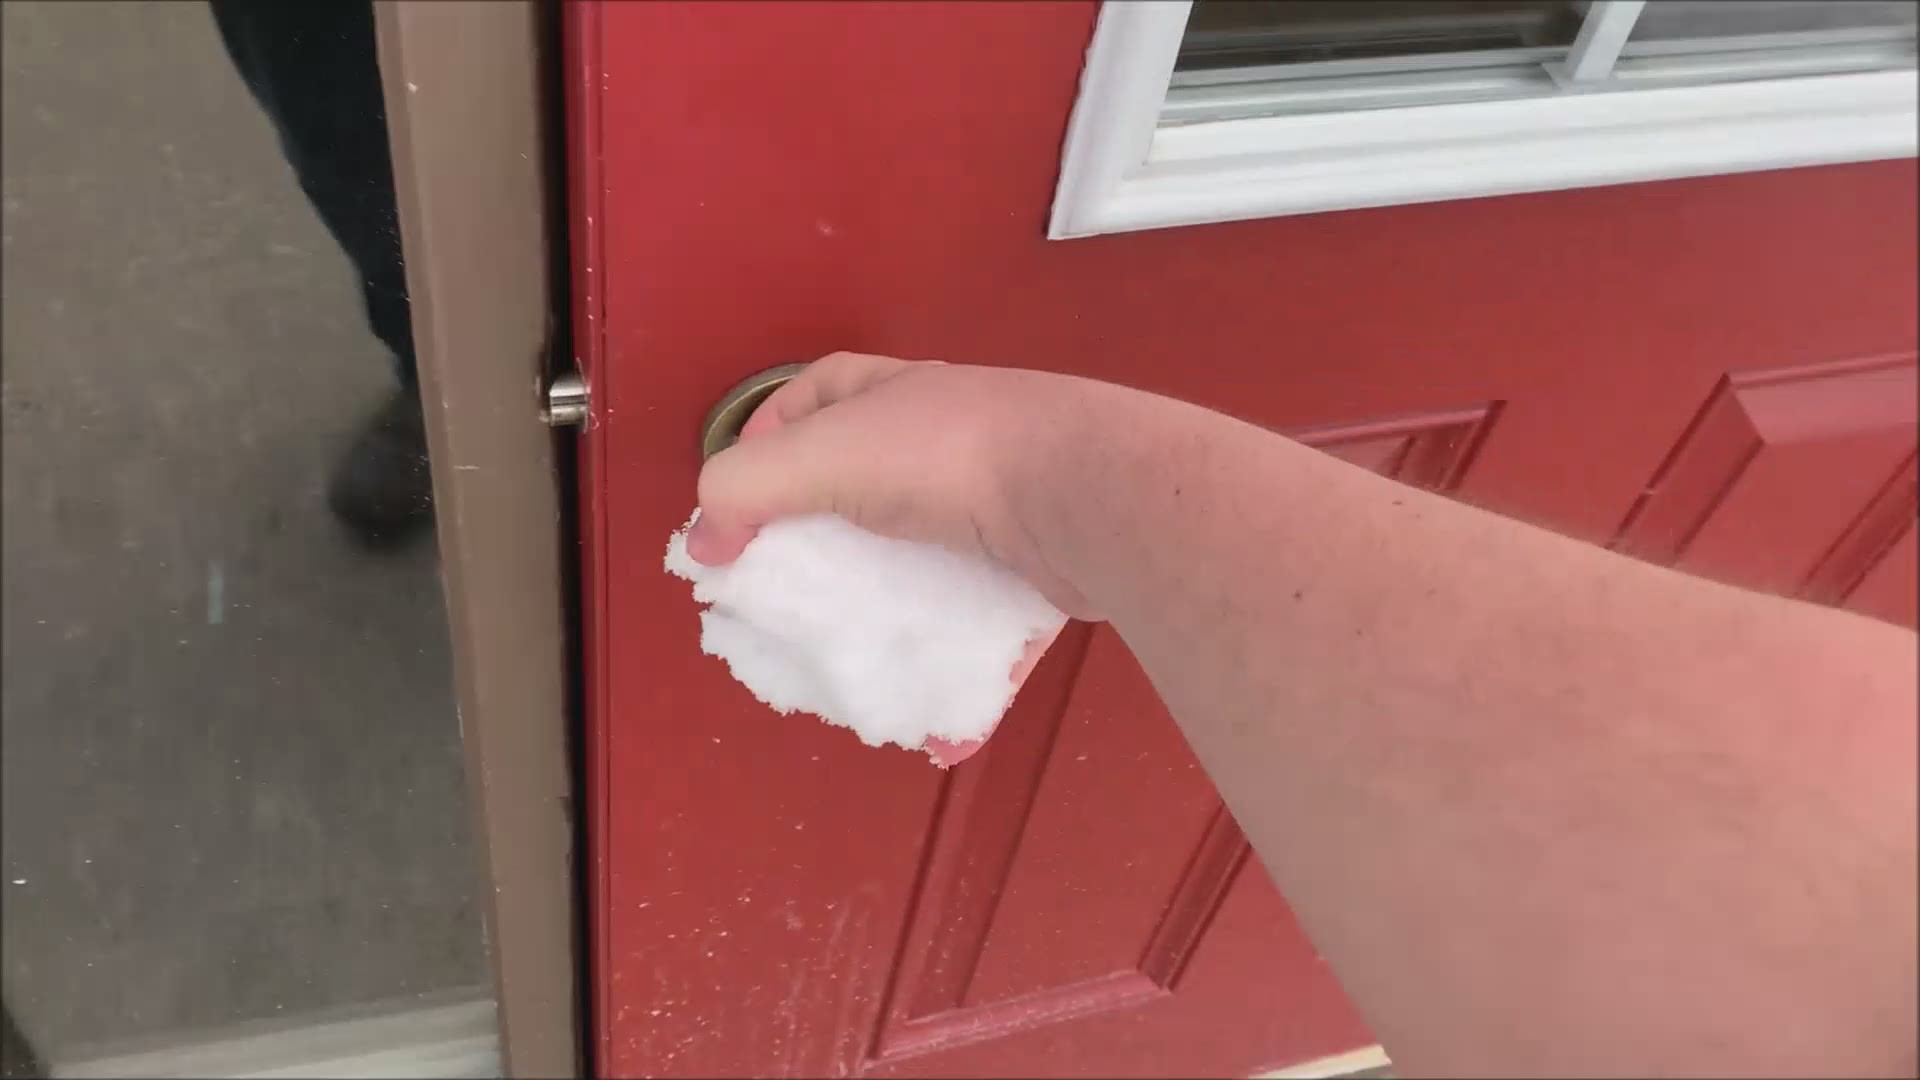 Time-lapse of a snowball melting. Observe how the liquid water is absorbed by the snow until reaching a level of saturation where it spills out.